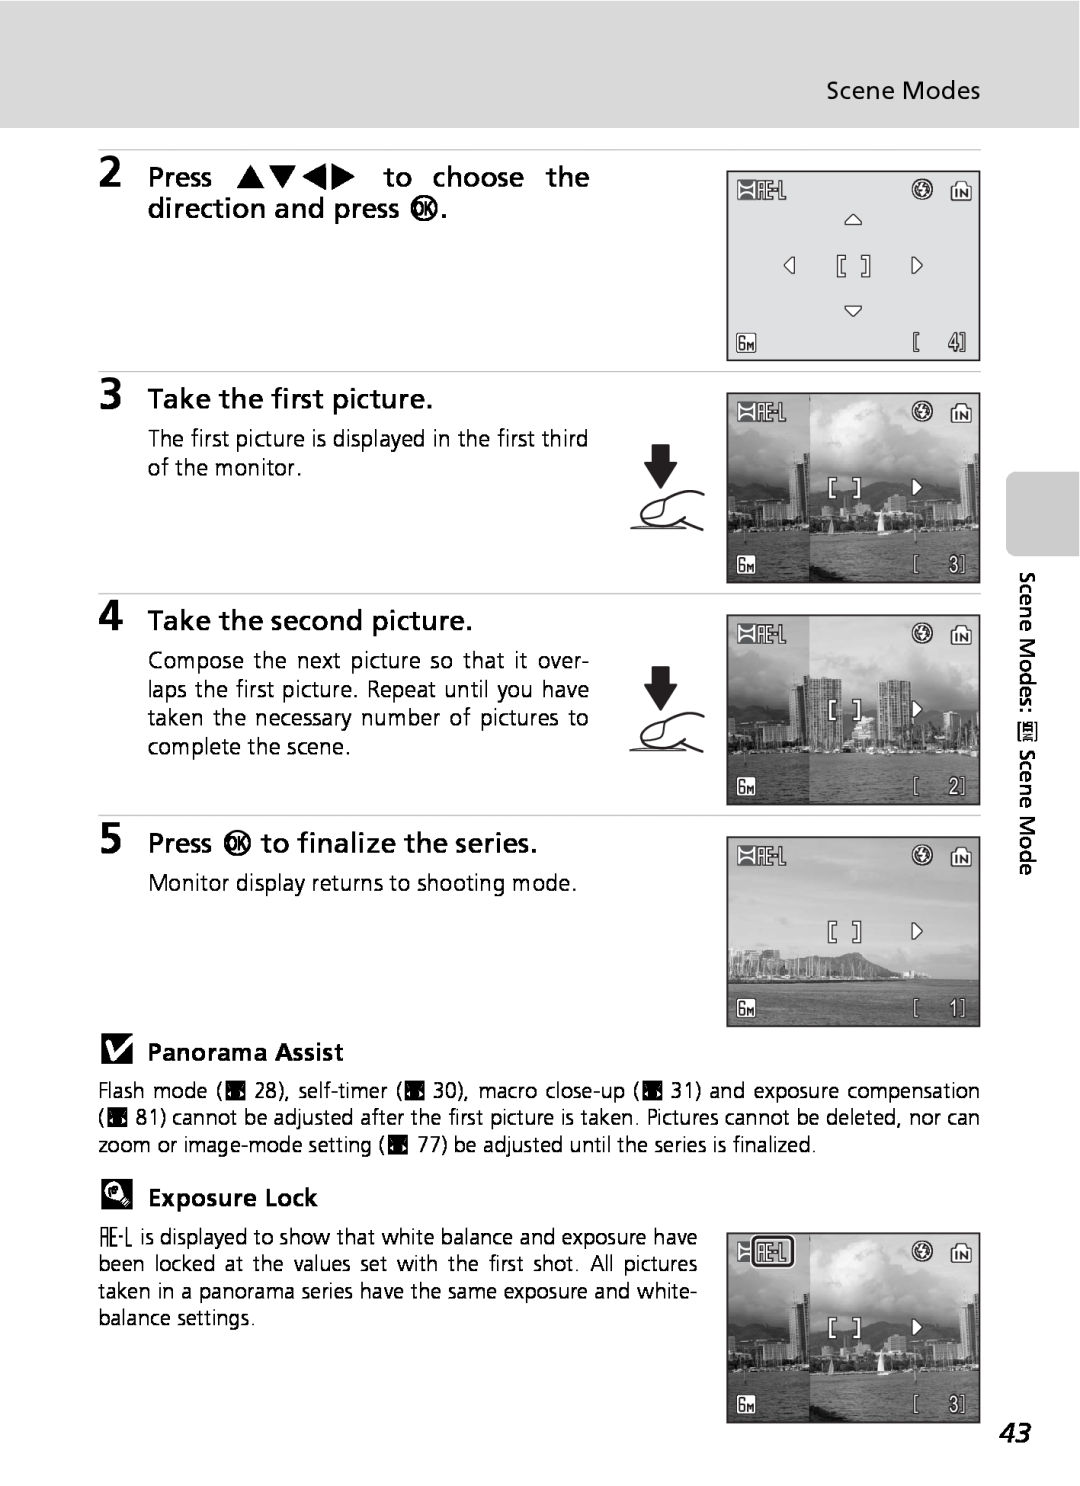 Nikon COOLPIXS9 manual Press GHIJ to choose the direction and press d, Take the first picture, Take the second picture 